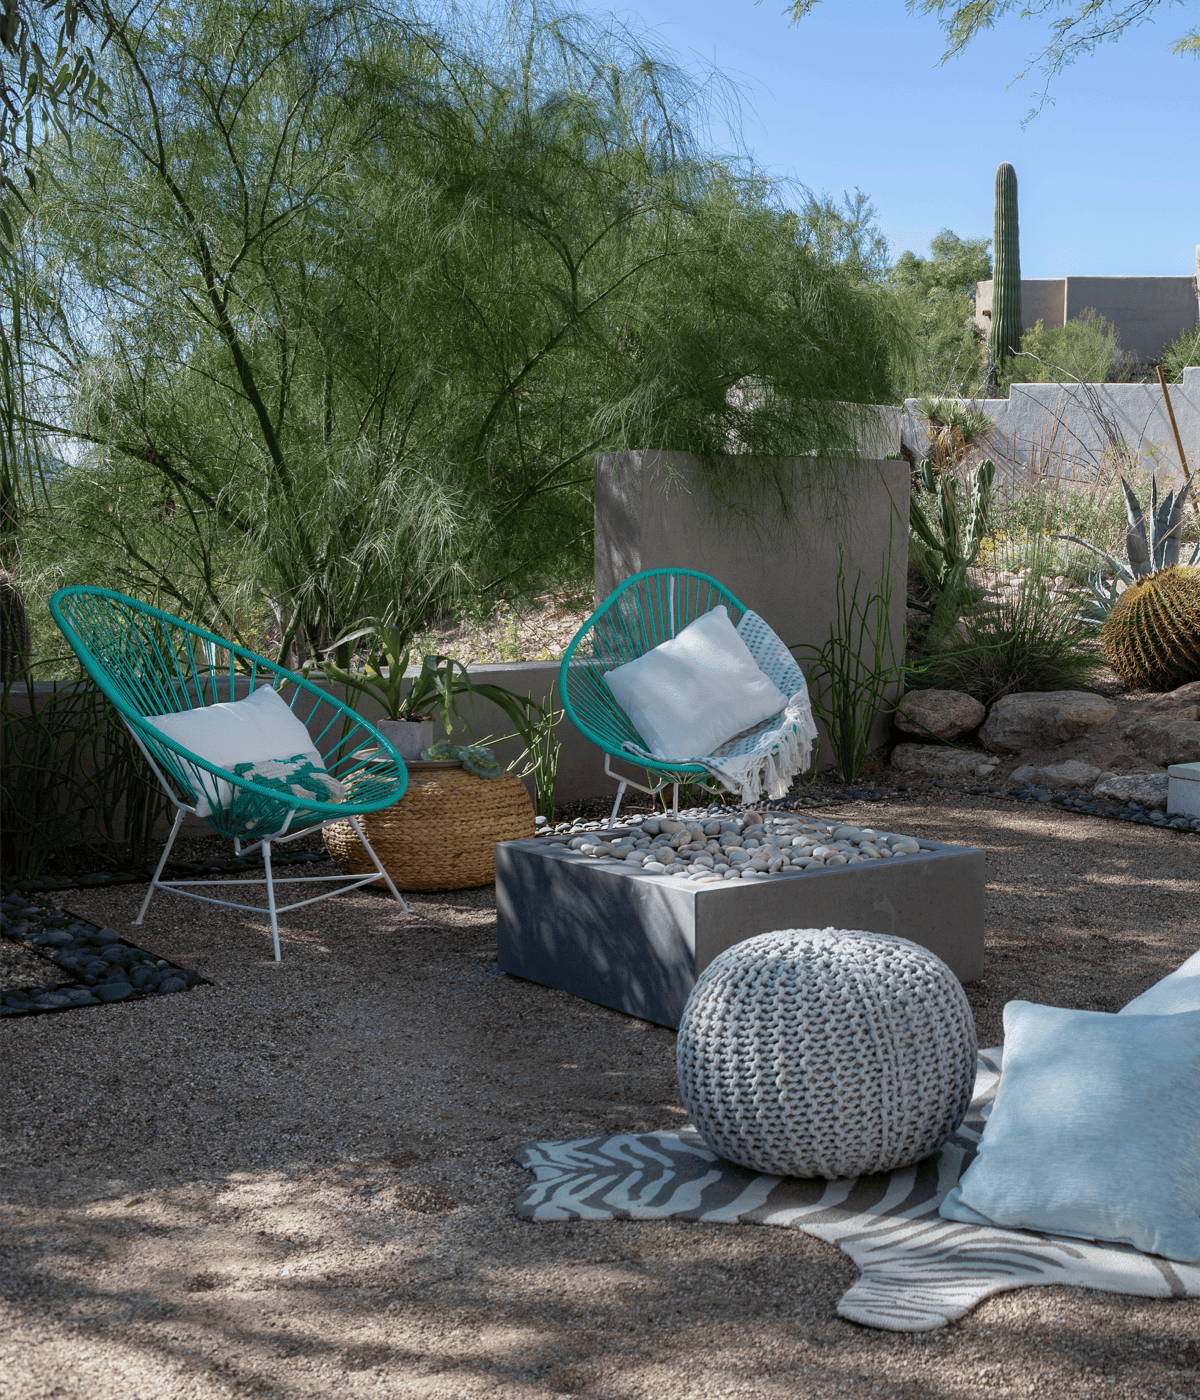 Modern lounge chairs around a fire pit in a desert backyard space.